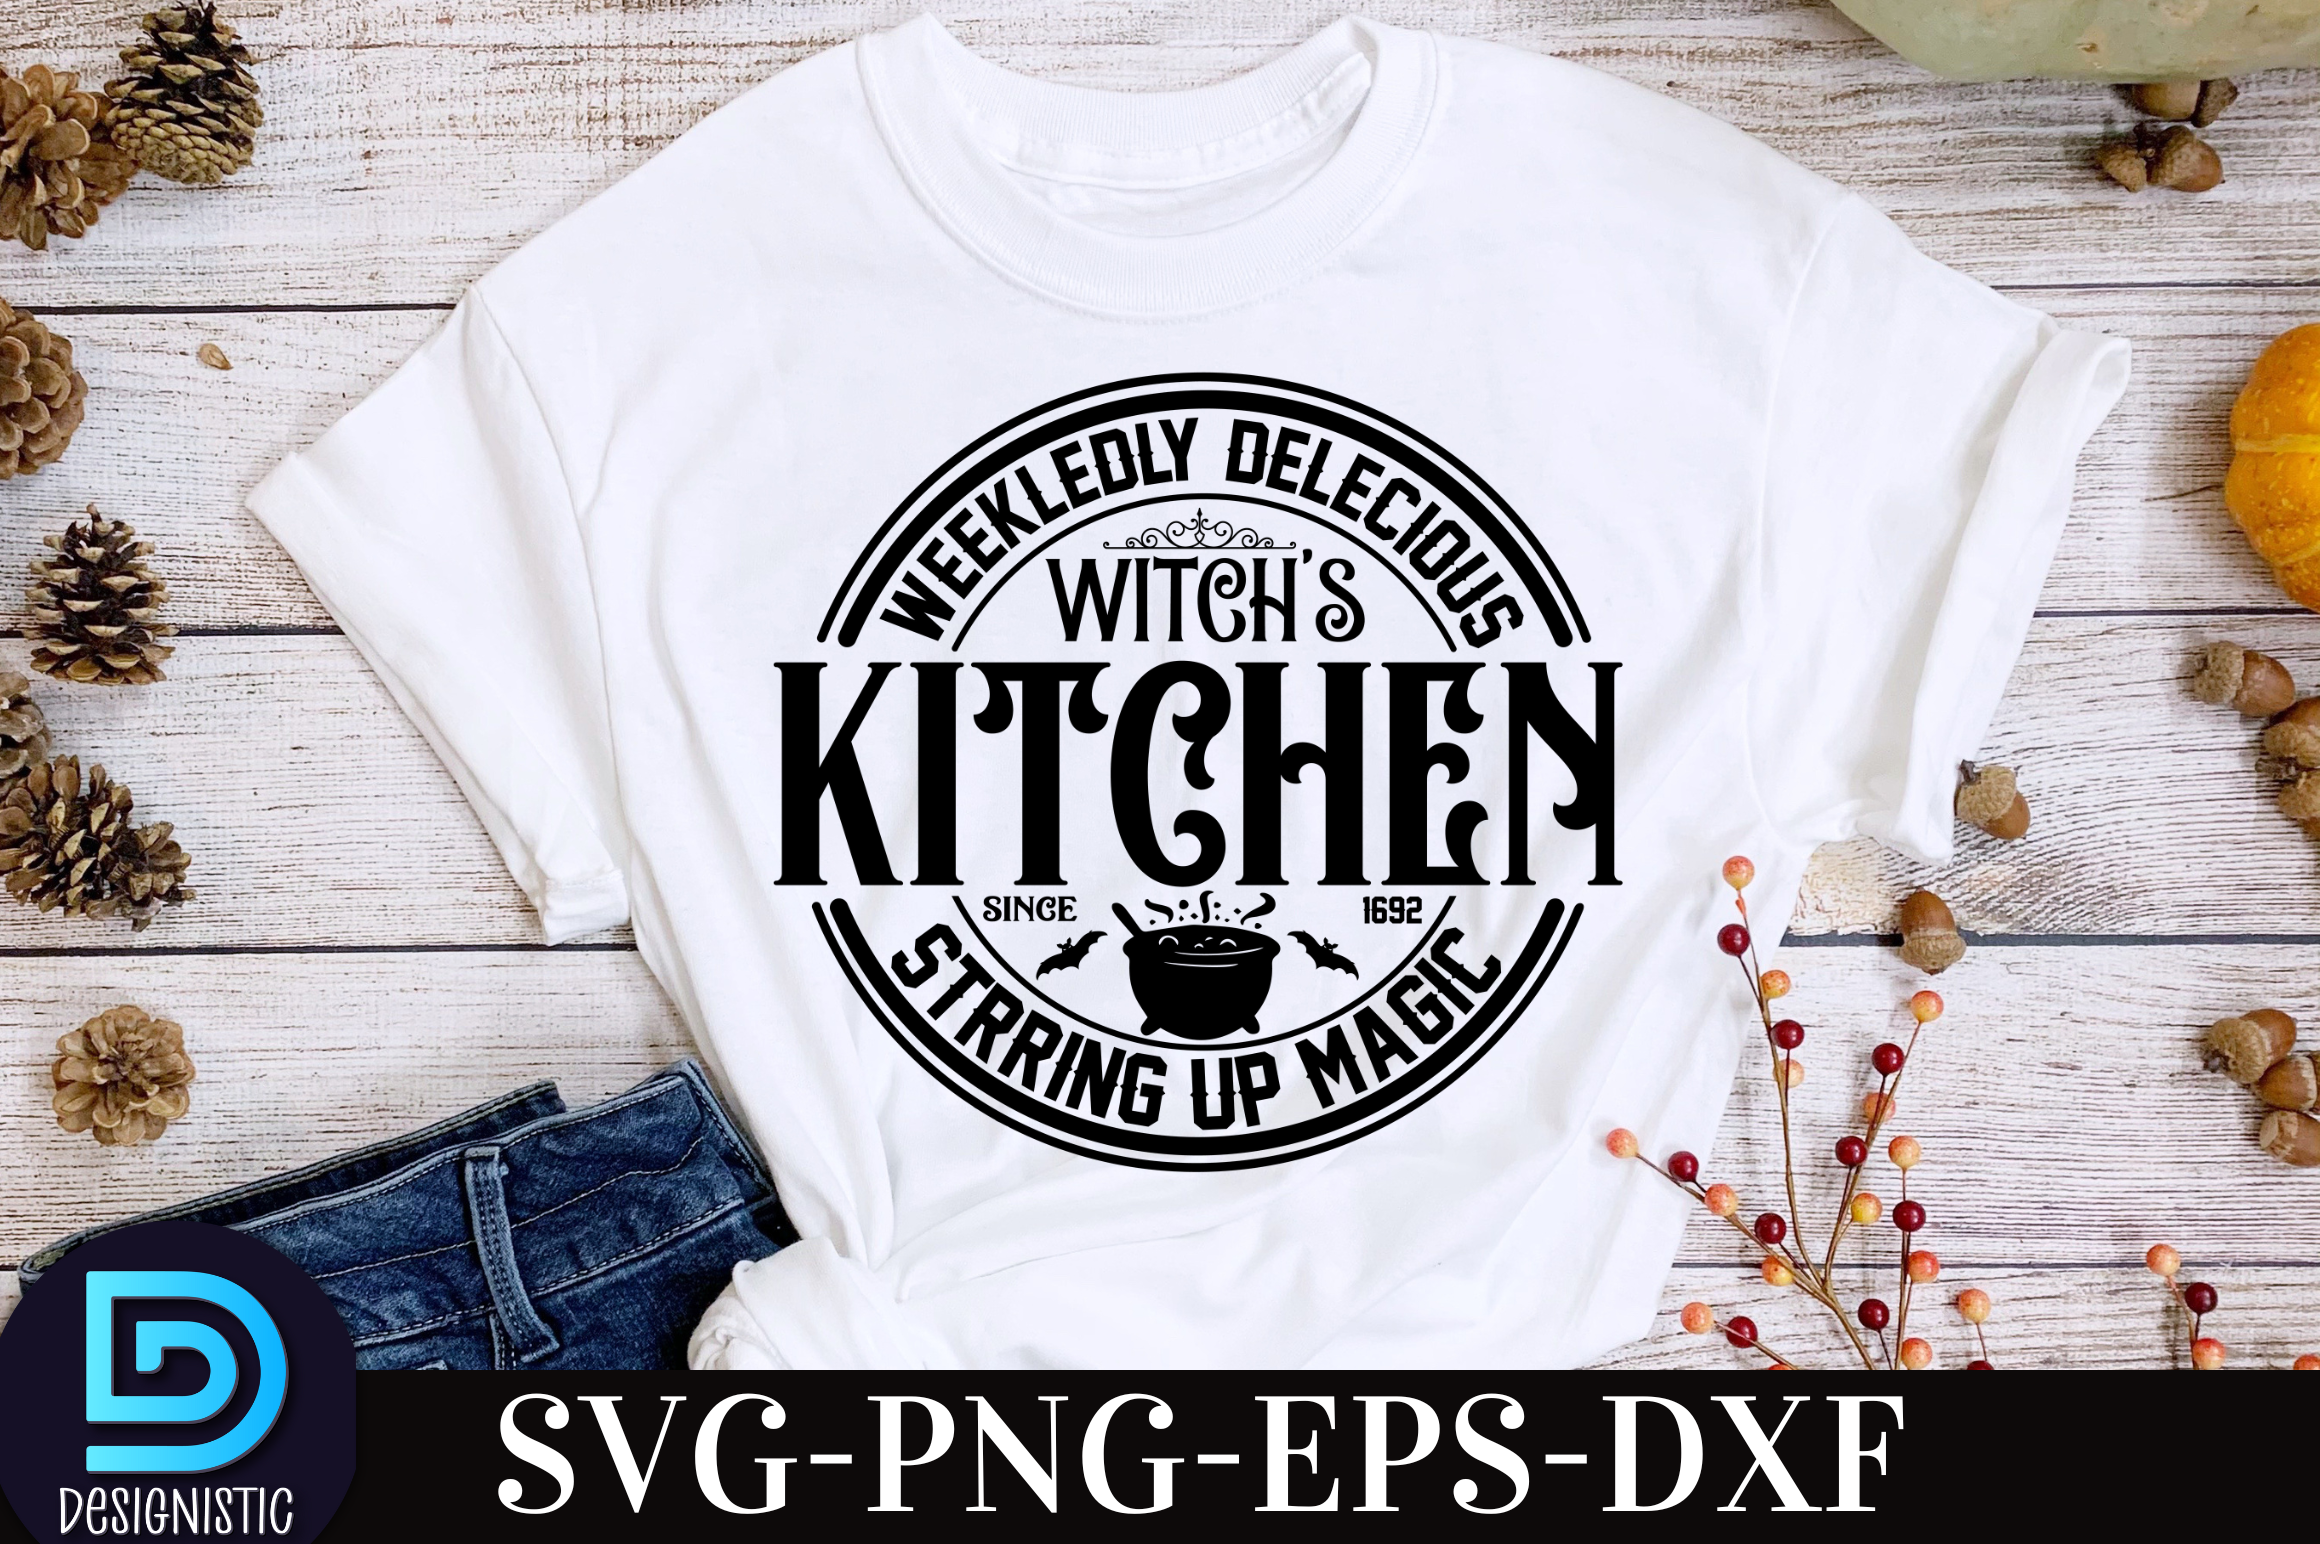 Wickedly Delicious Witches Kitchen Stirring Up Some Magic Doormat - Tagotee